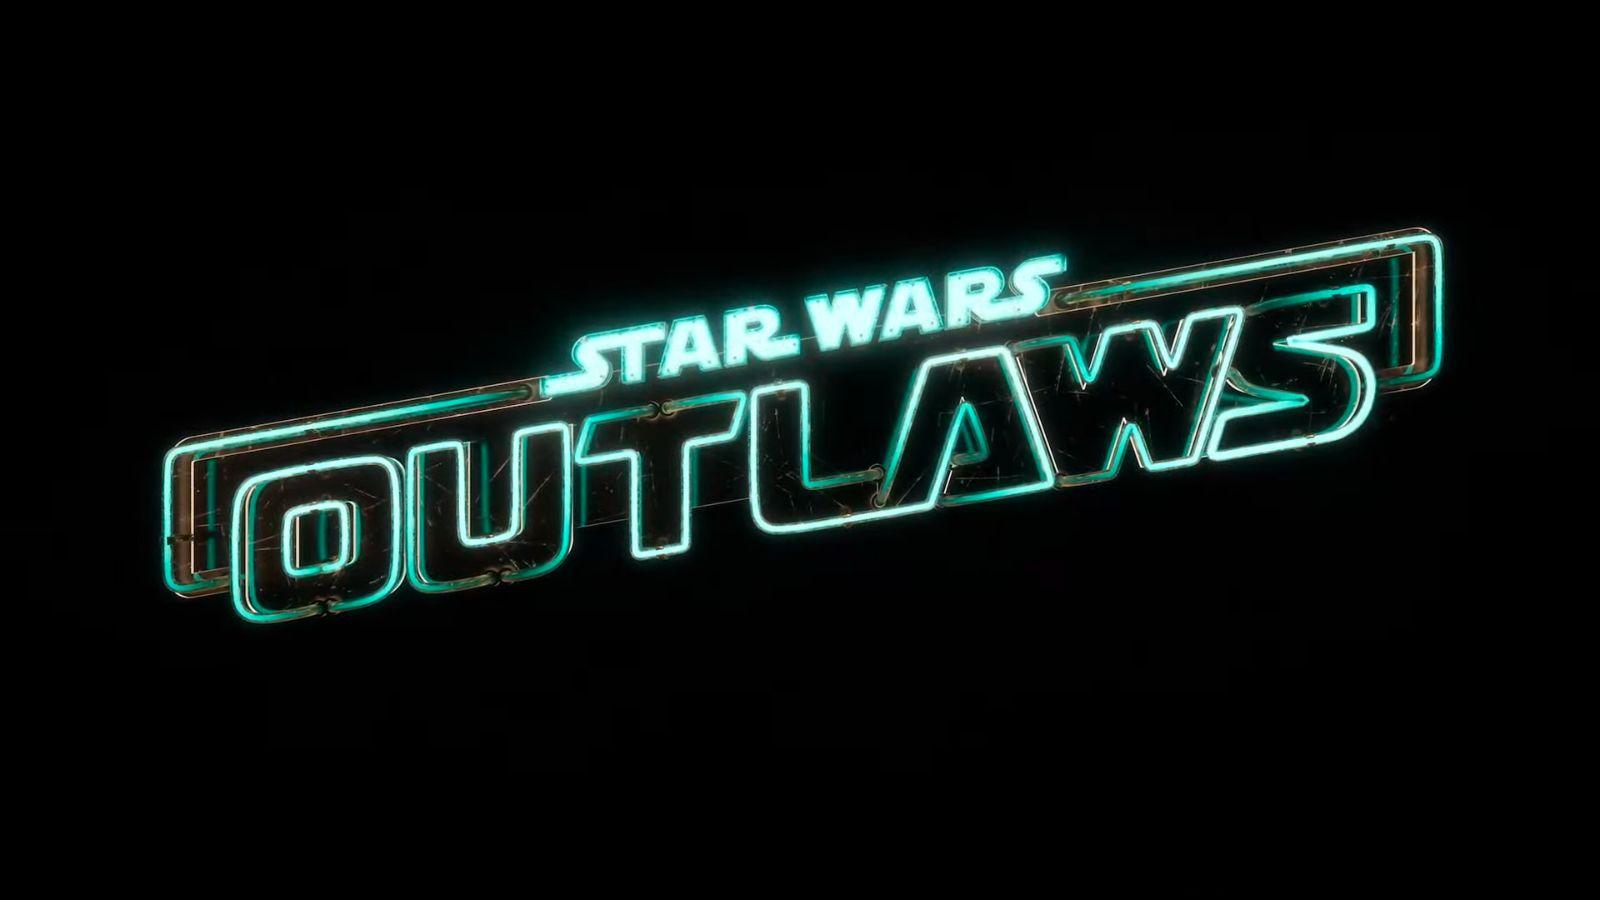 Everything we know about Star Wars Outlaws